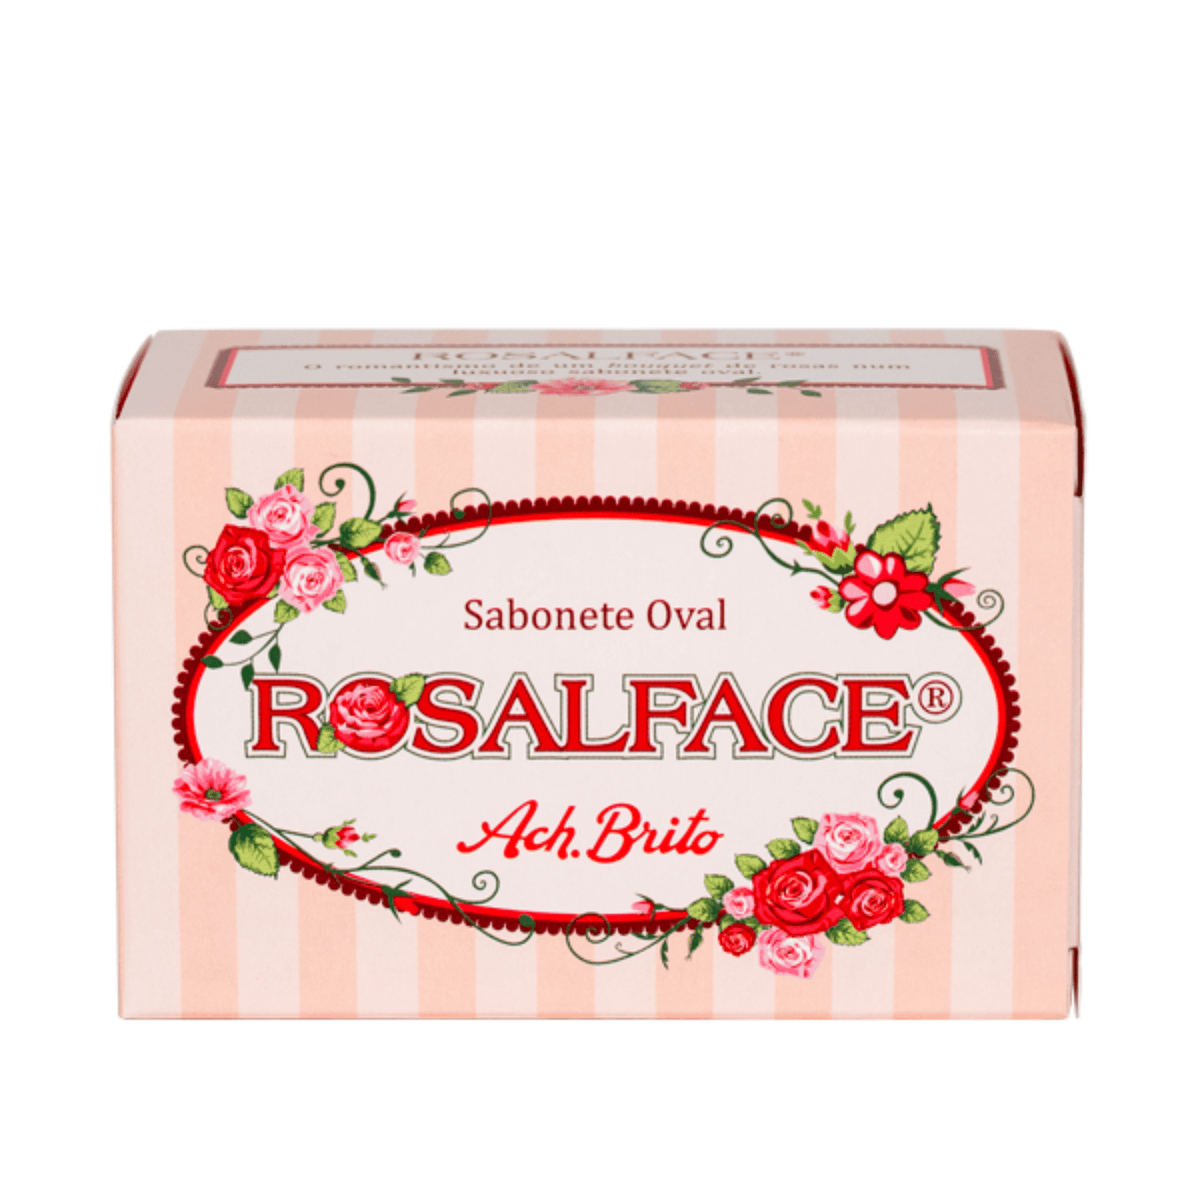 Primary Image of Rosalface (Rose) Soap